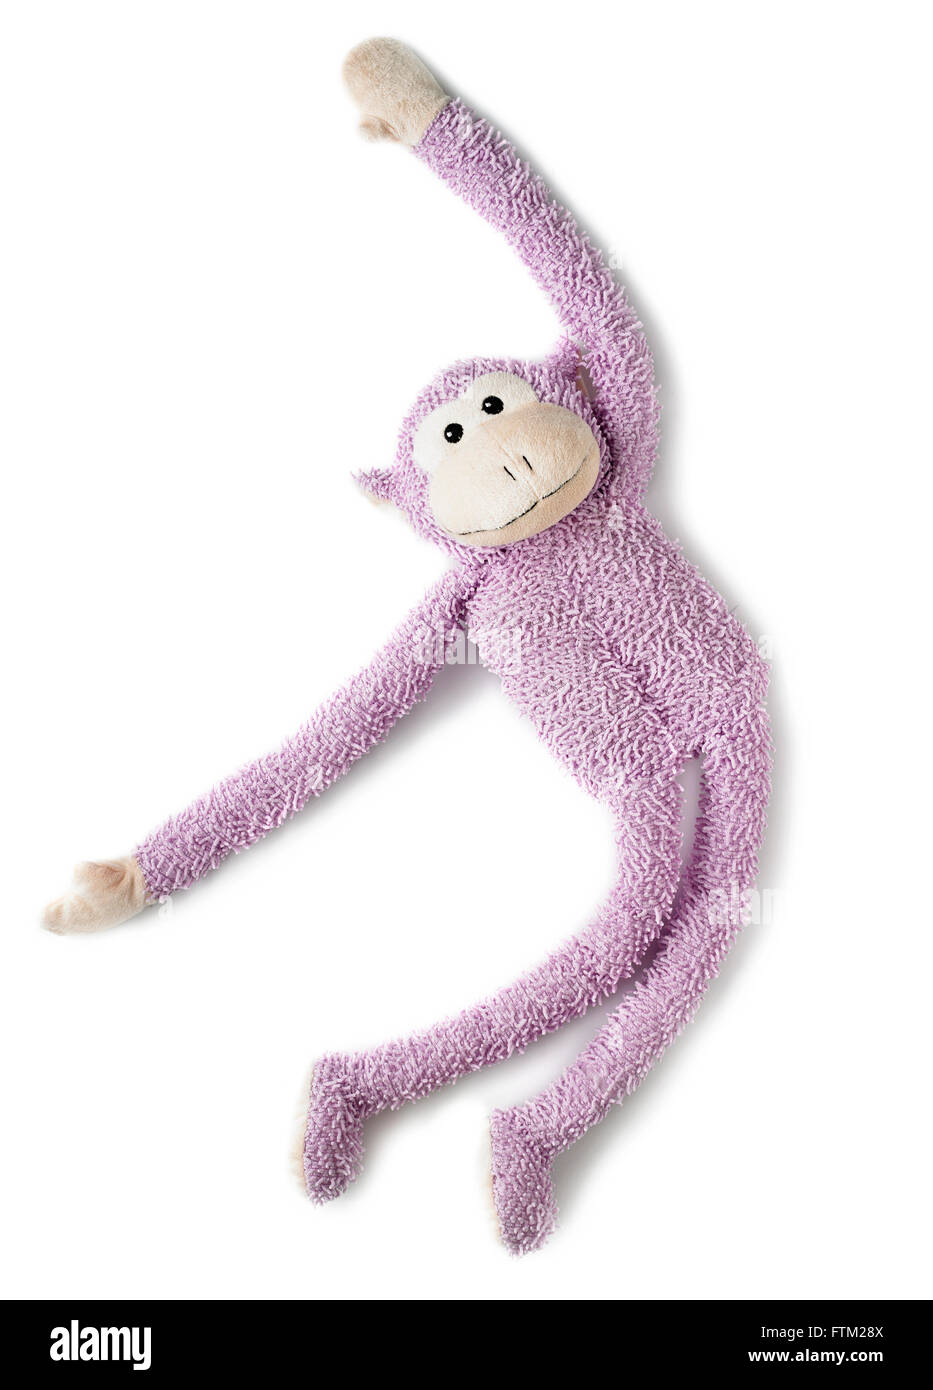 Overhead shot of a pink monkey toy Stock Photo